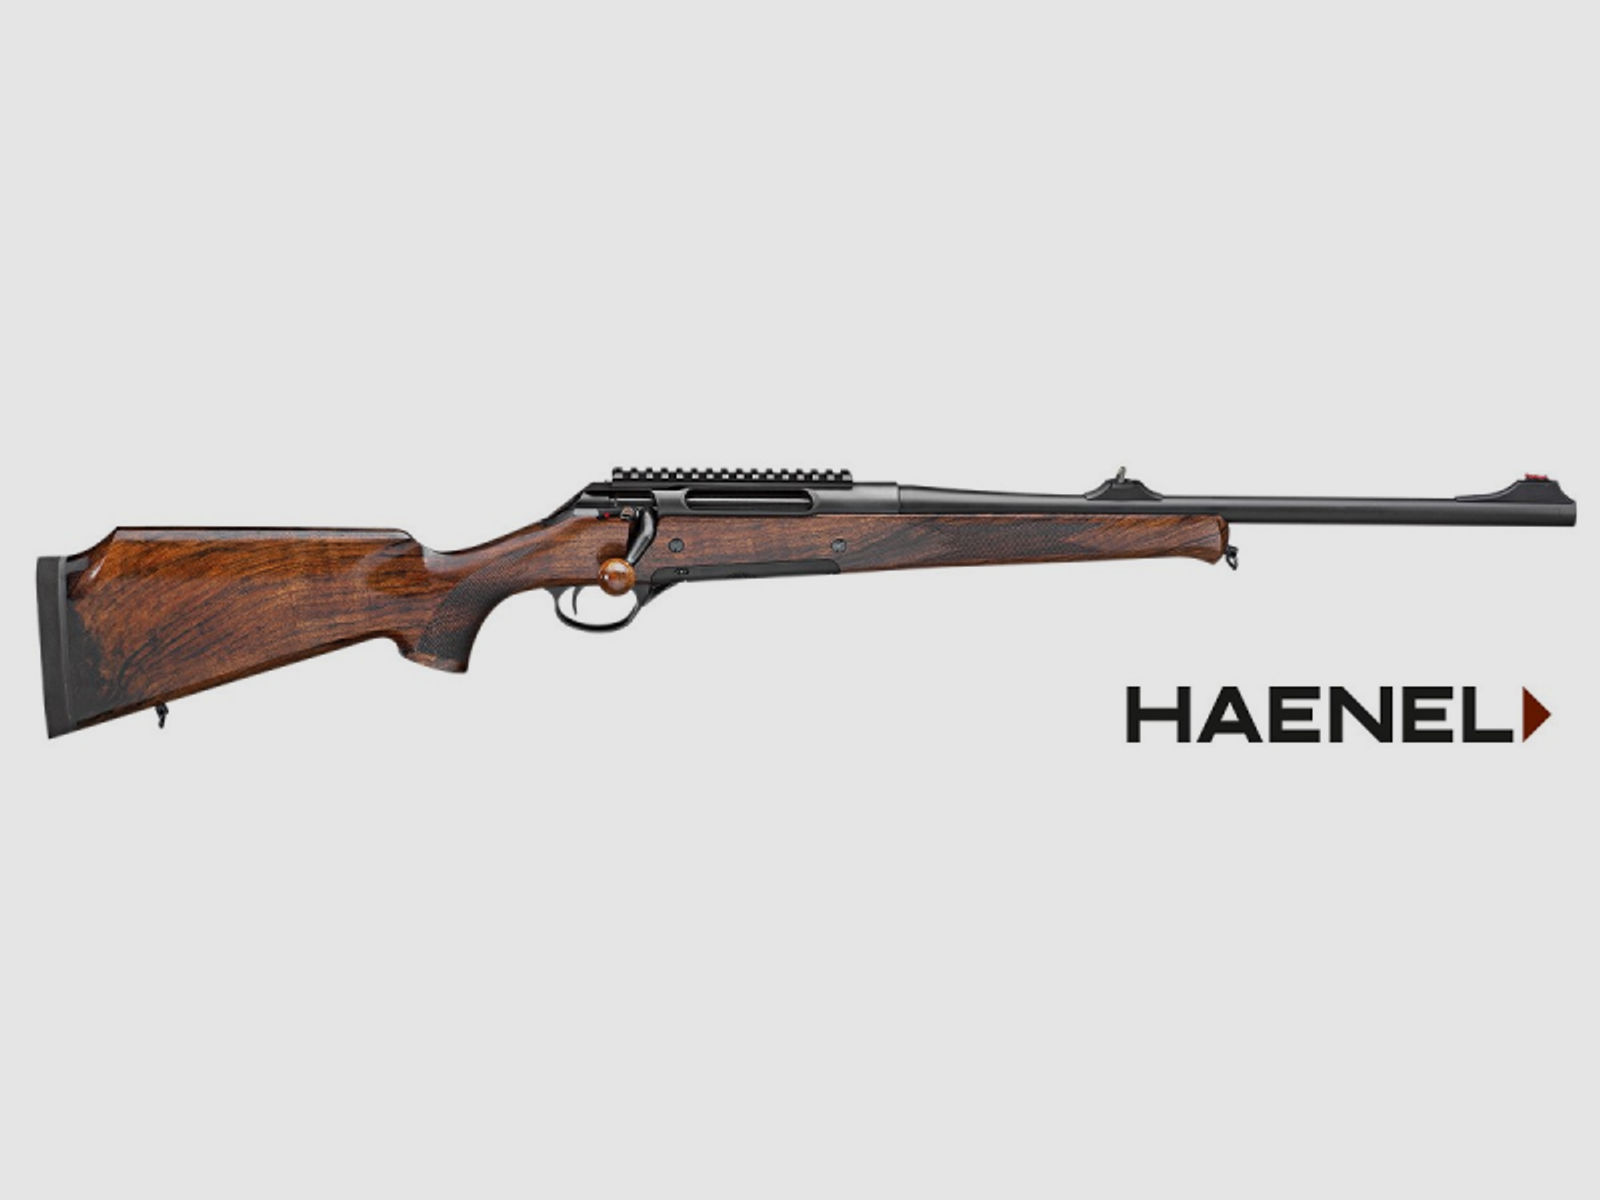 HAENEL Jaeger 10 Timber Lady Compact .308 Win